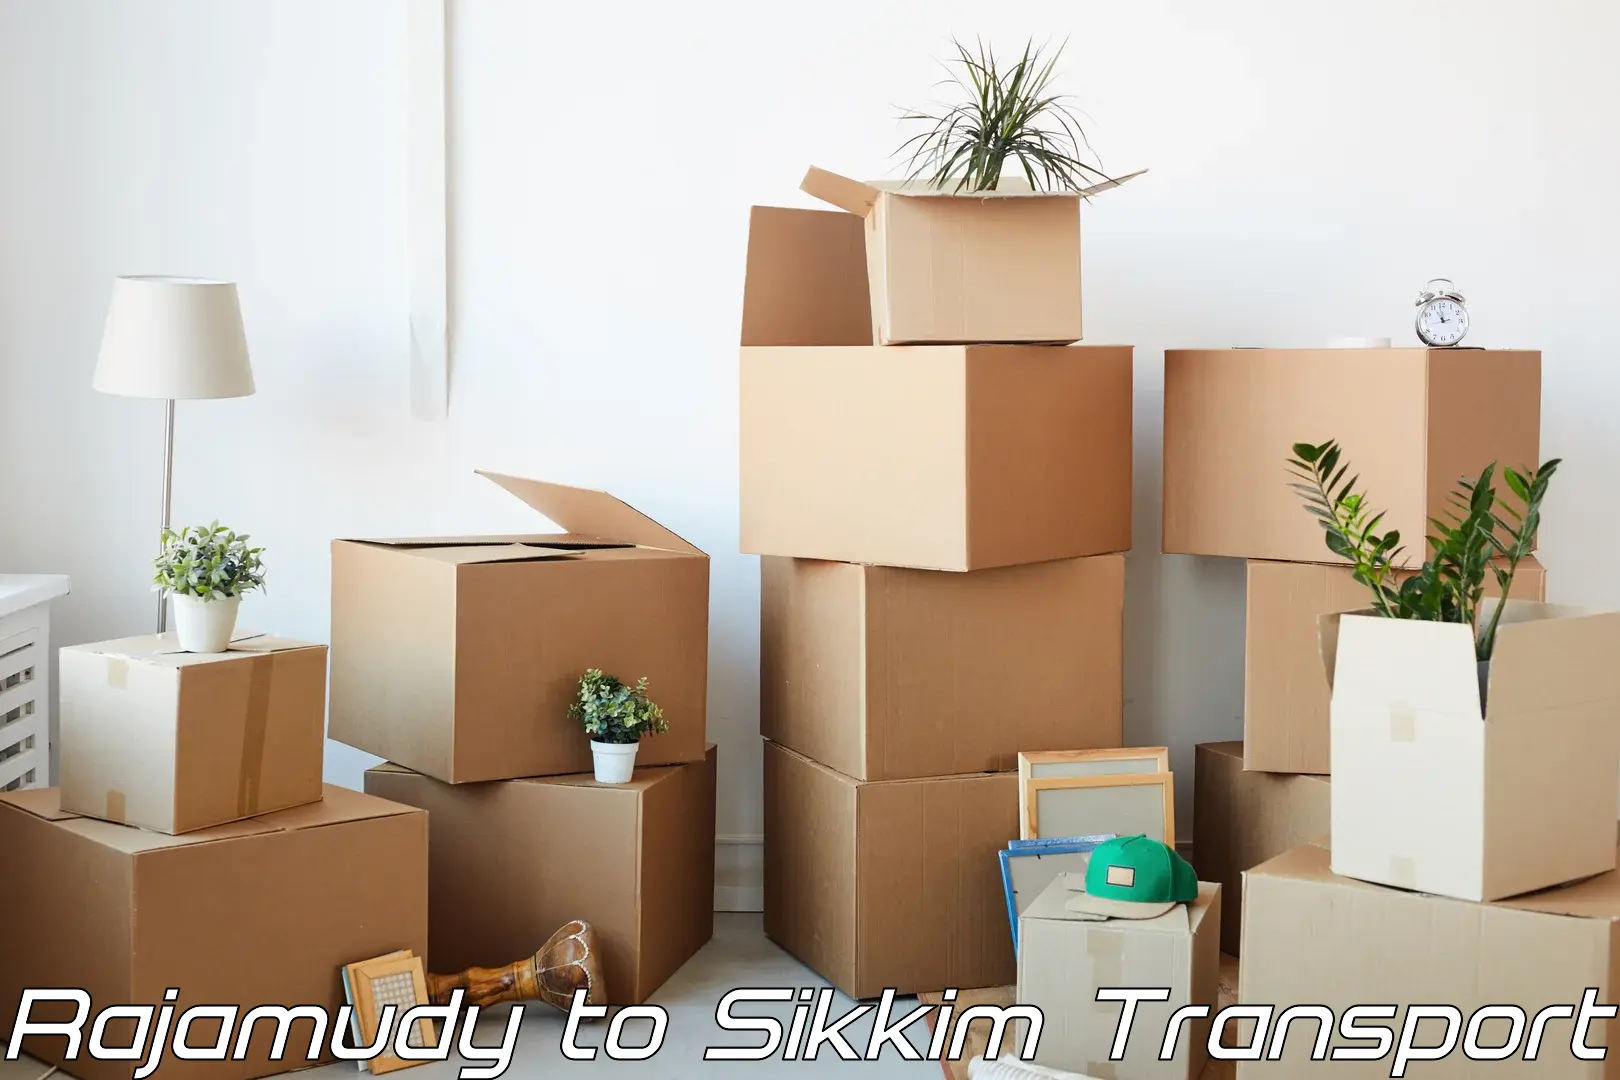 Shipping partner Rajamudy to West Sikkim